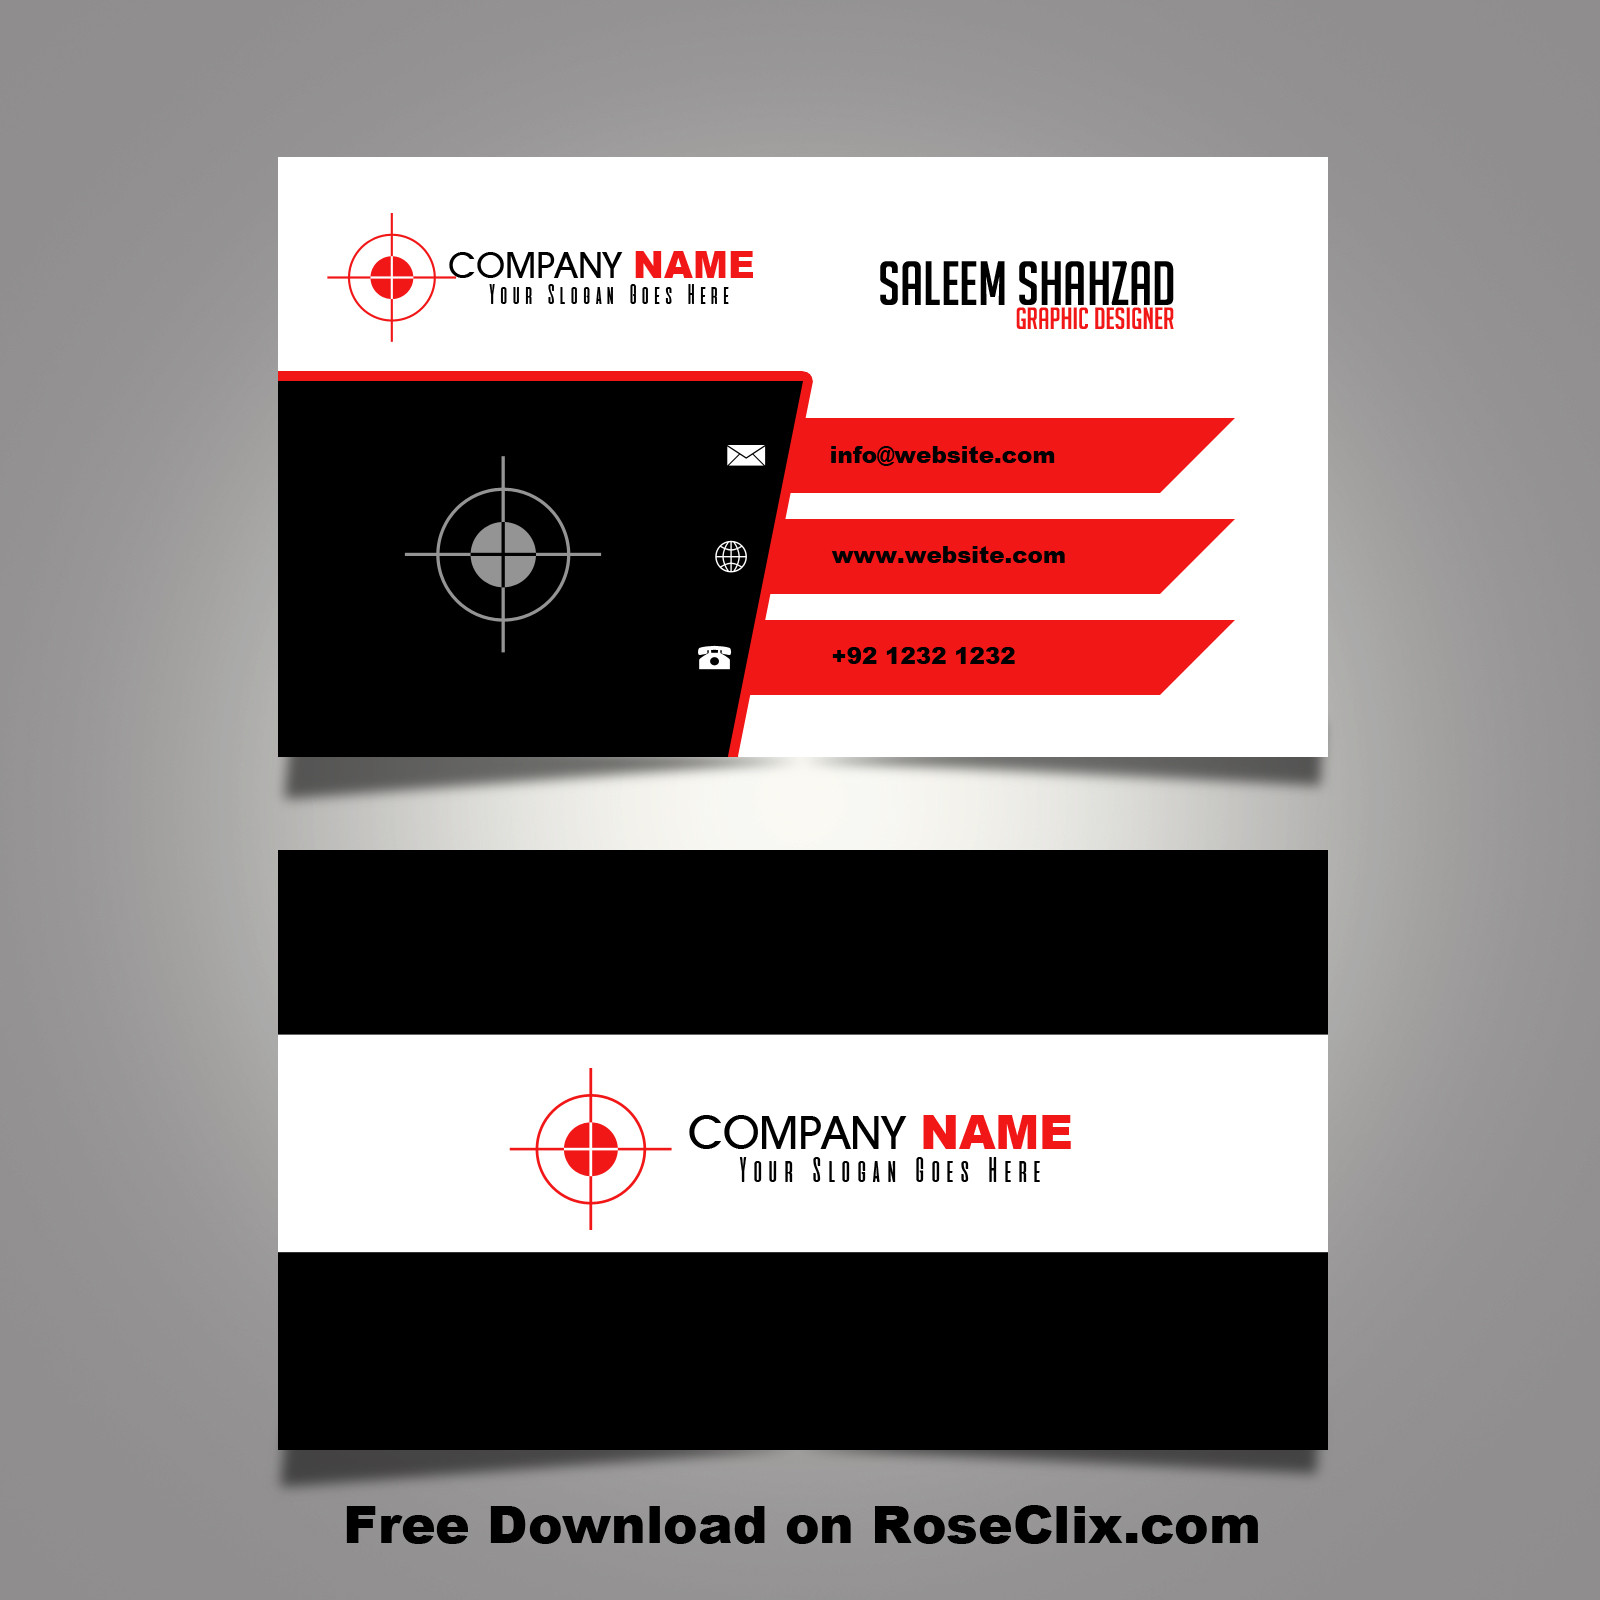 002 245 Gall E00cb9 Template Ideas Free Downloads Of Psd Business Card Templates